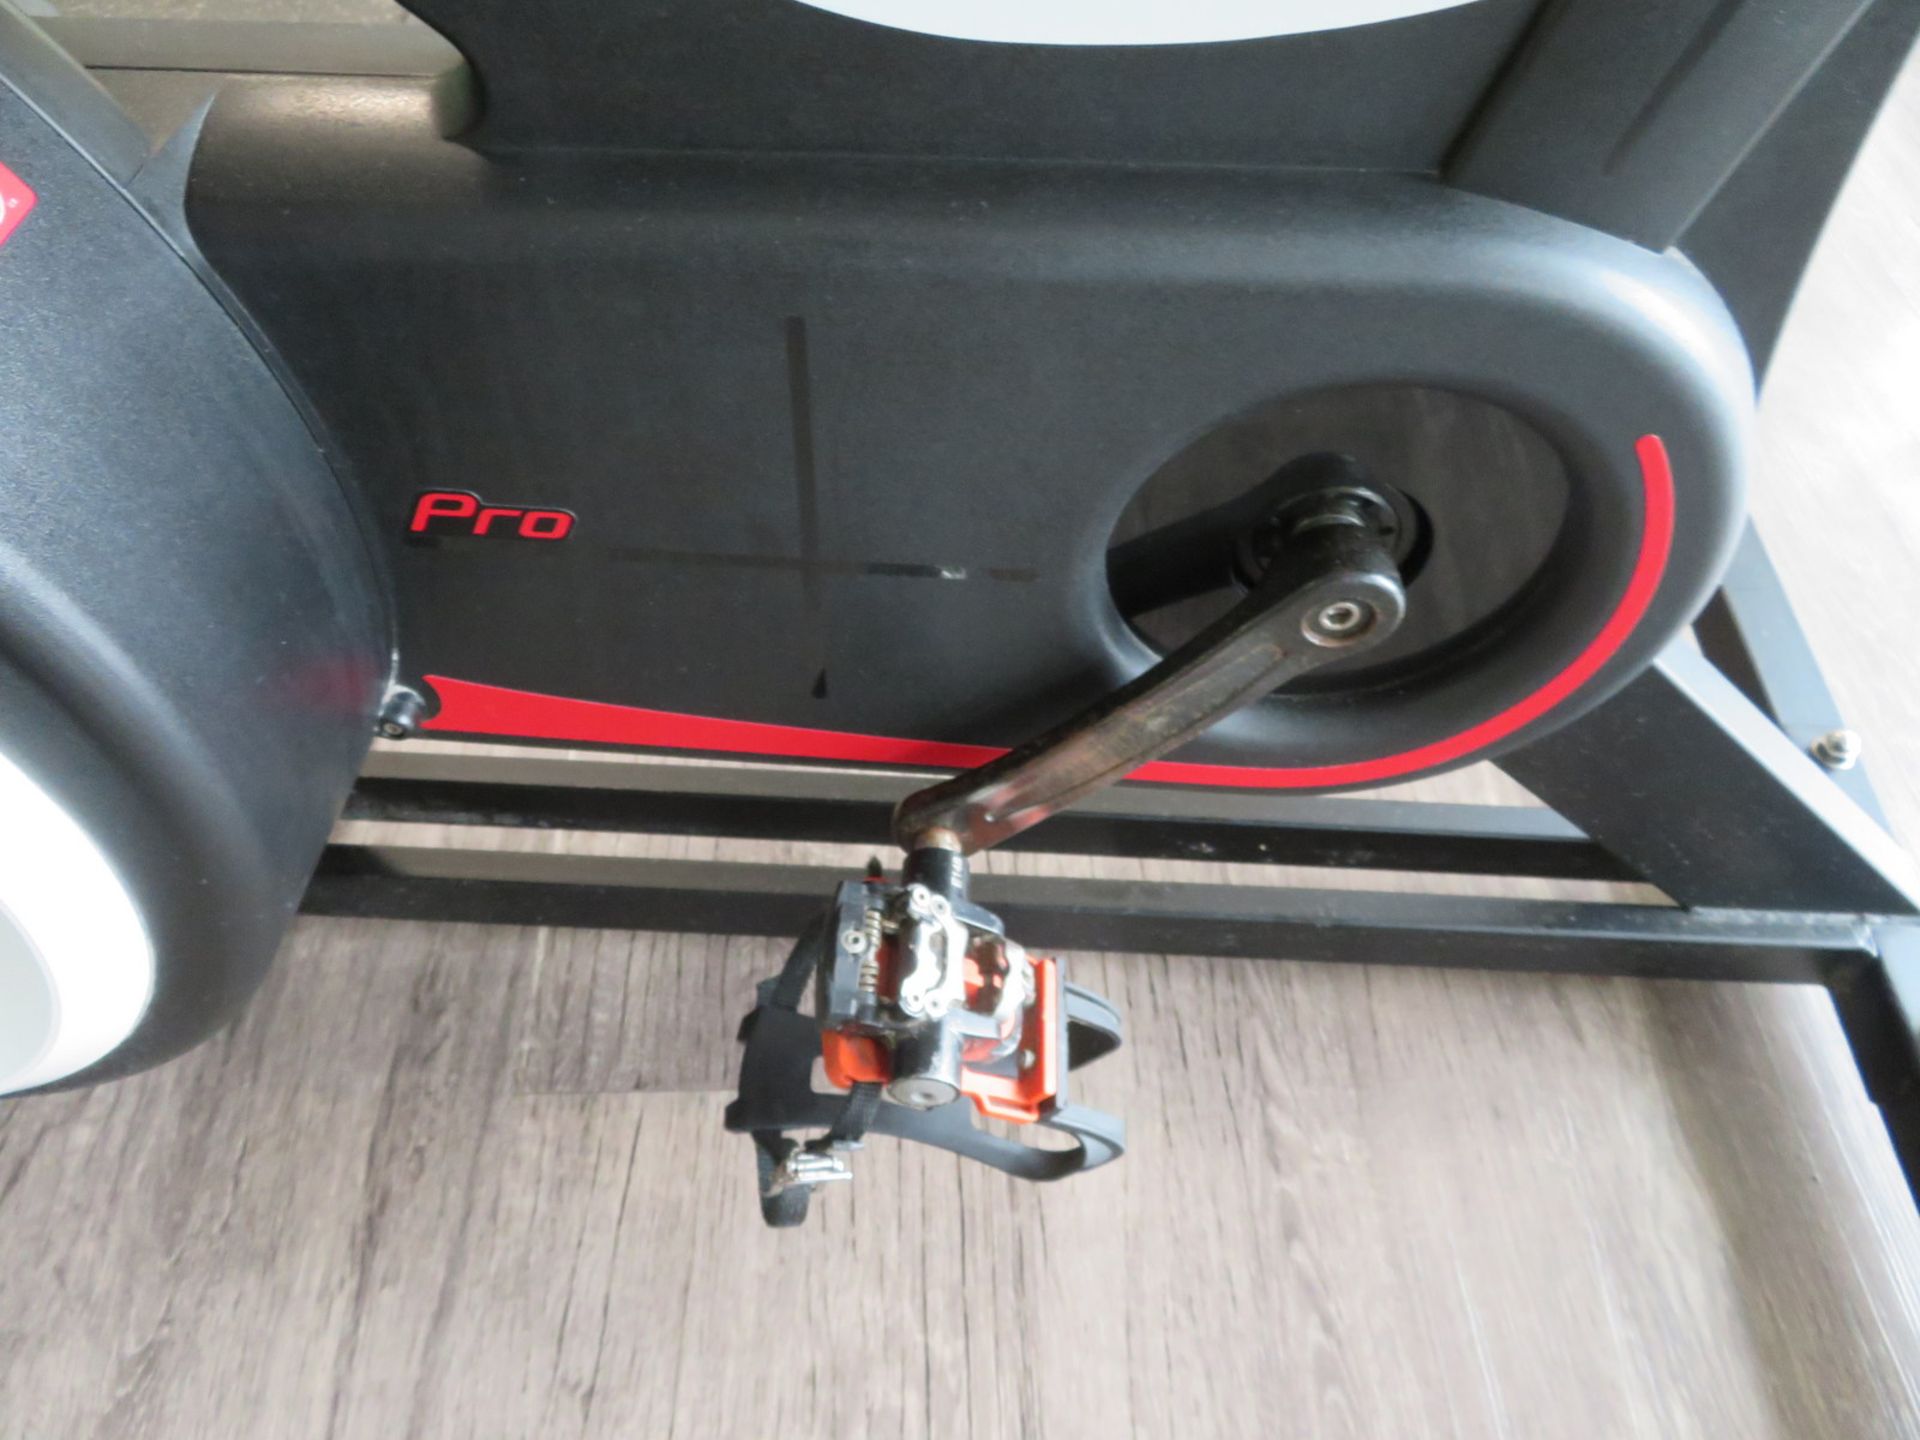 Watt Bike Pro Exercise Bike Complete With Model B Digital Display Console. Good Working Condition. - Image 5 of 10